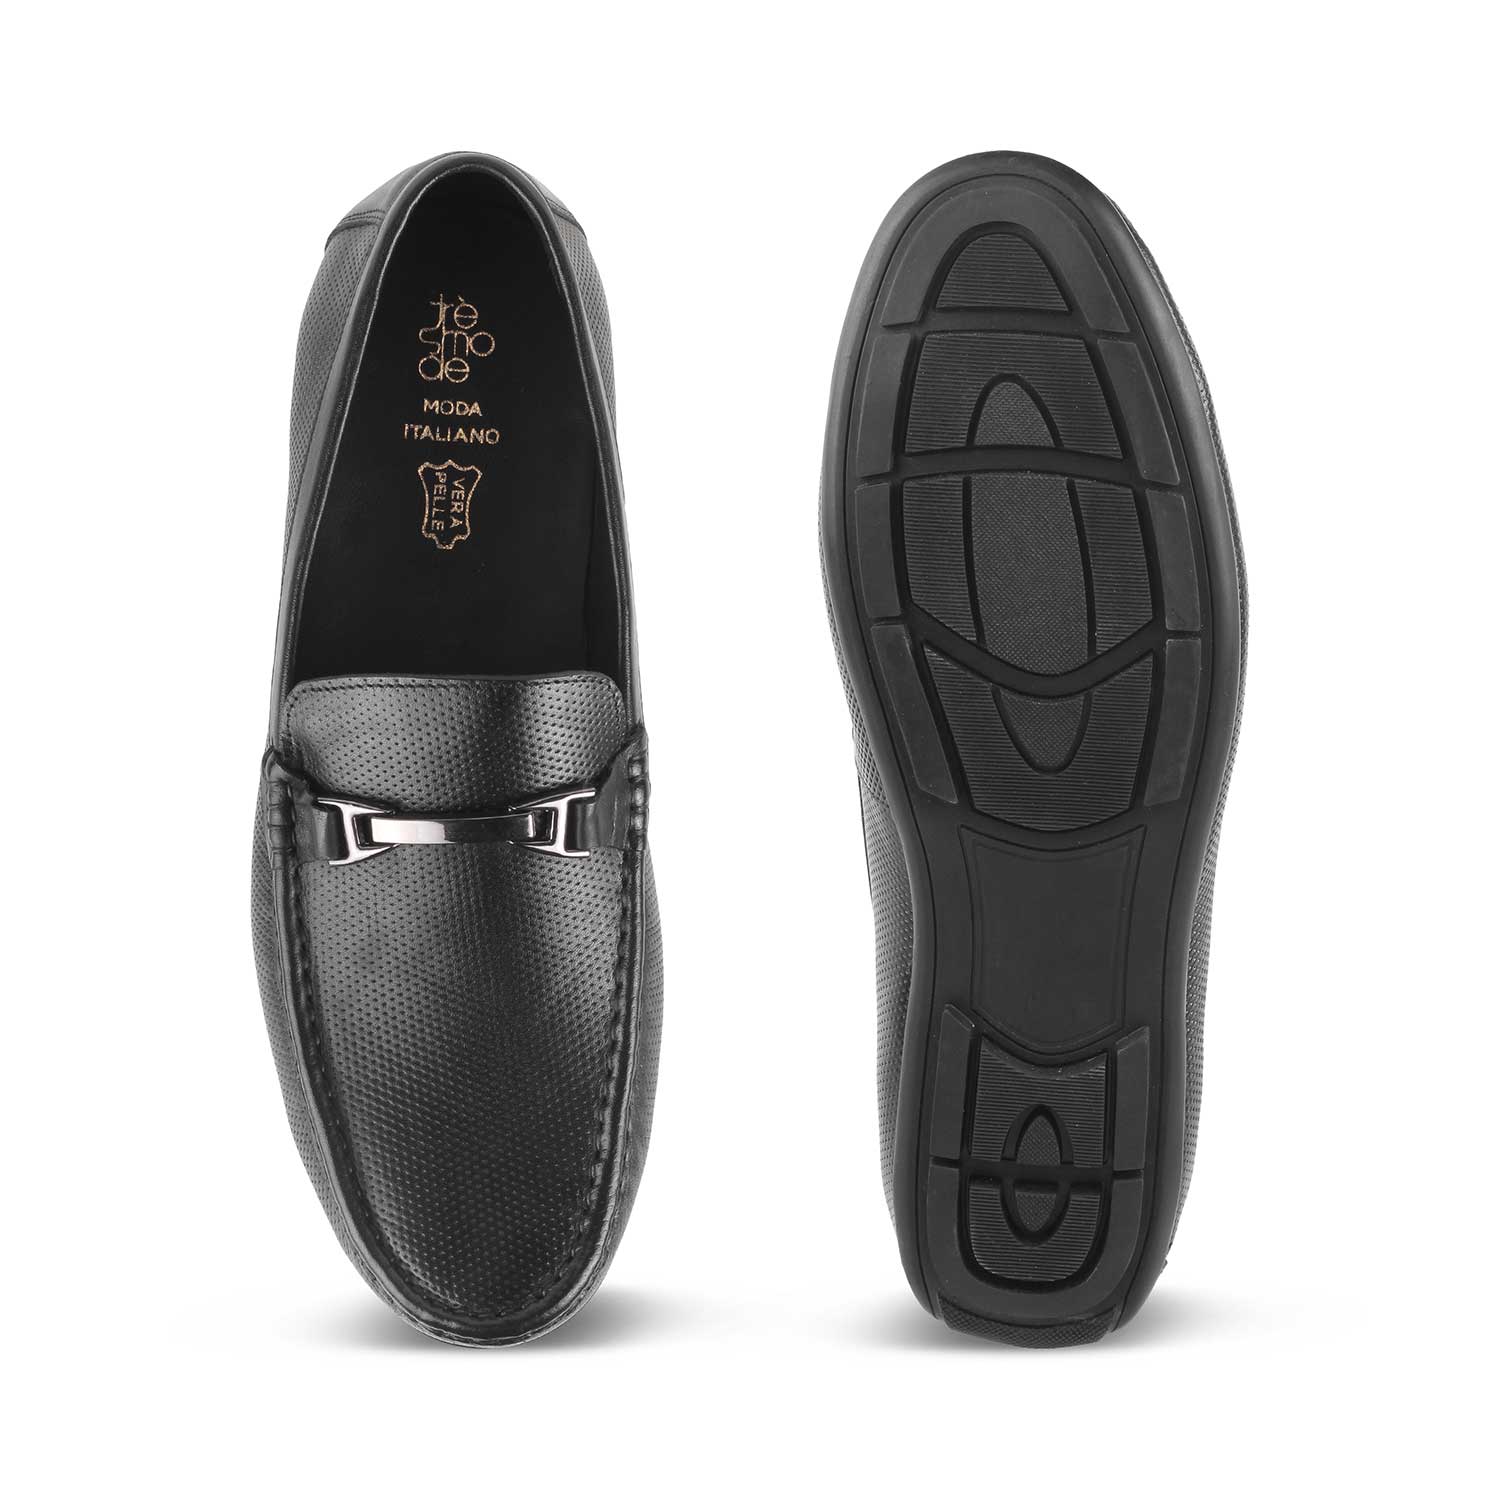 Tresmode-The Abianca Black Men's Leather Driving Loafers Tresmode-Tresmode